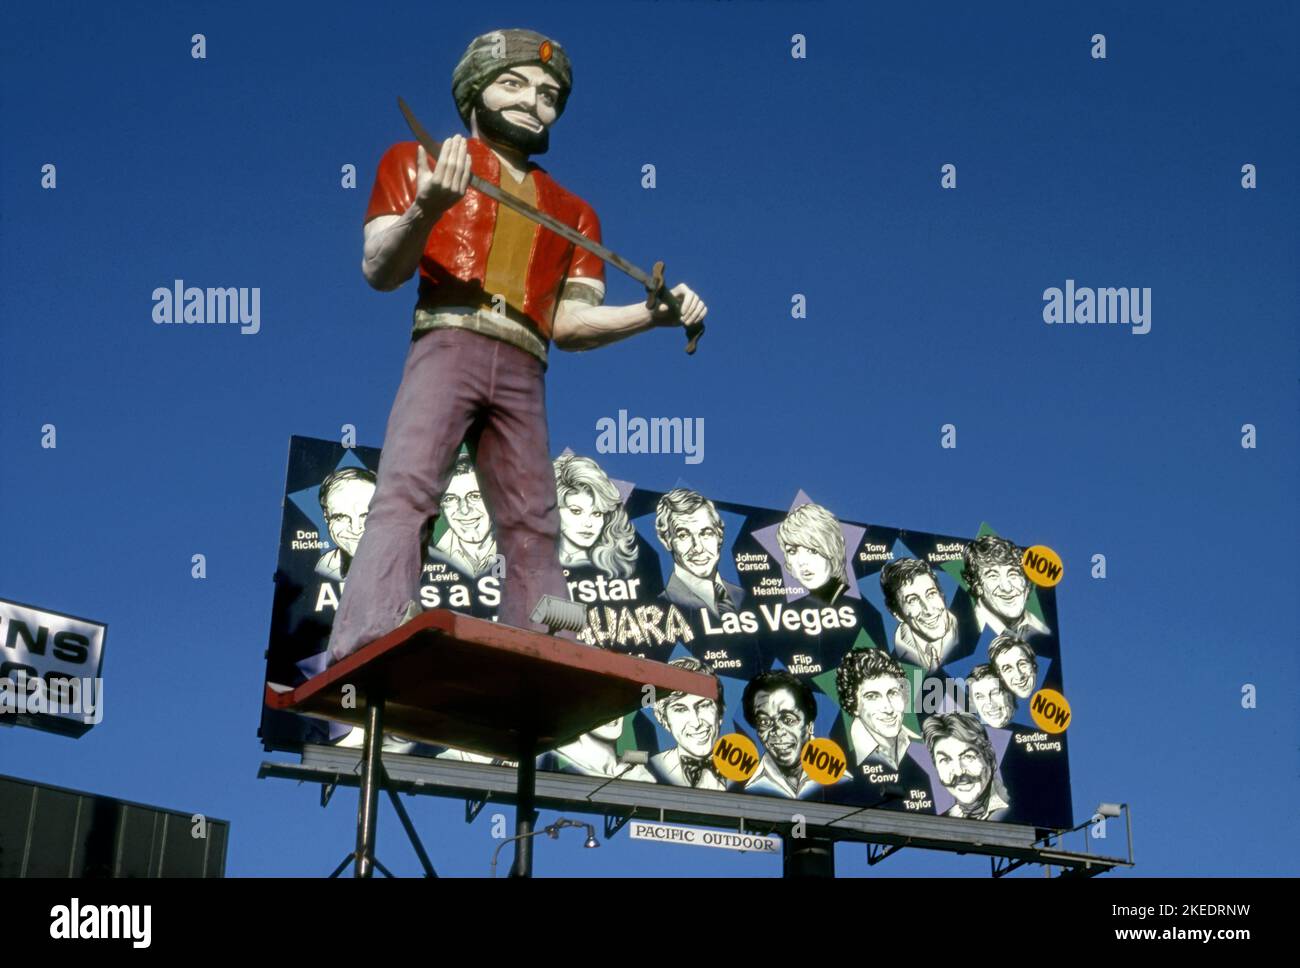 Large advertising figure for a restaurant called Ali Baba's on Sunset Boulevard near La Brea in Hollywood, CA. Stock Photo